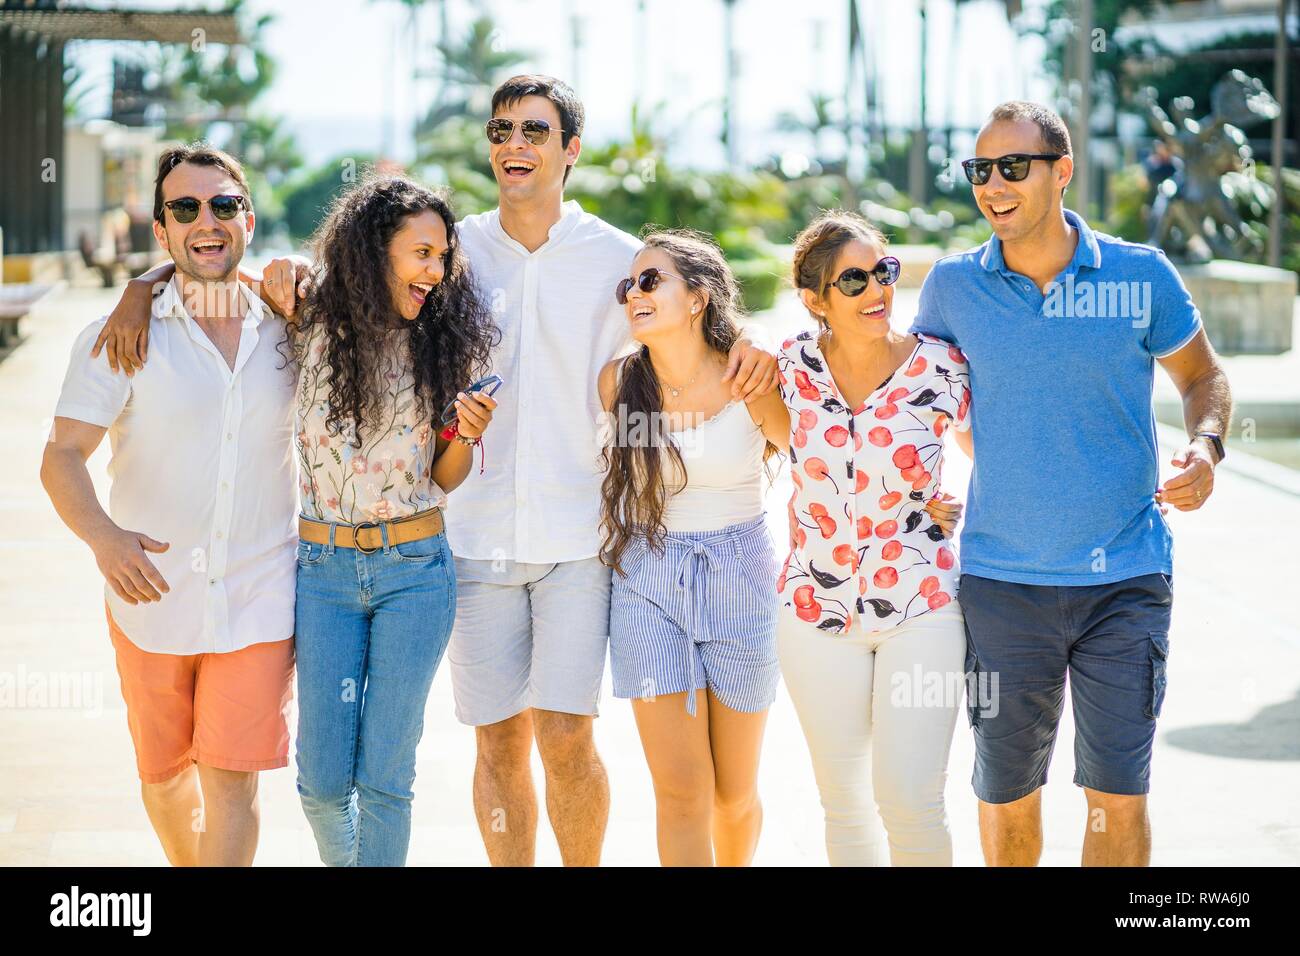 Six friends walking, taking, laughing and having fun during day time in urban setting, Portugal Stock Photo